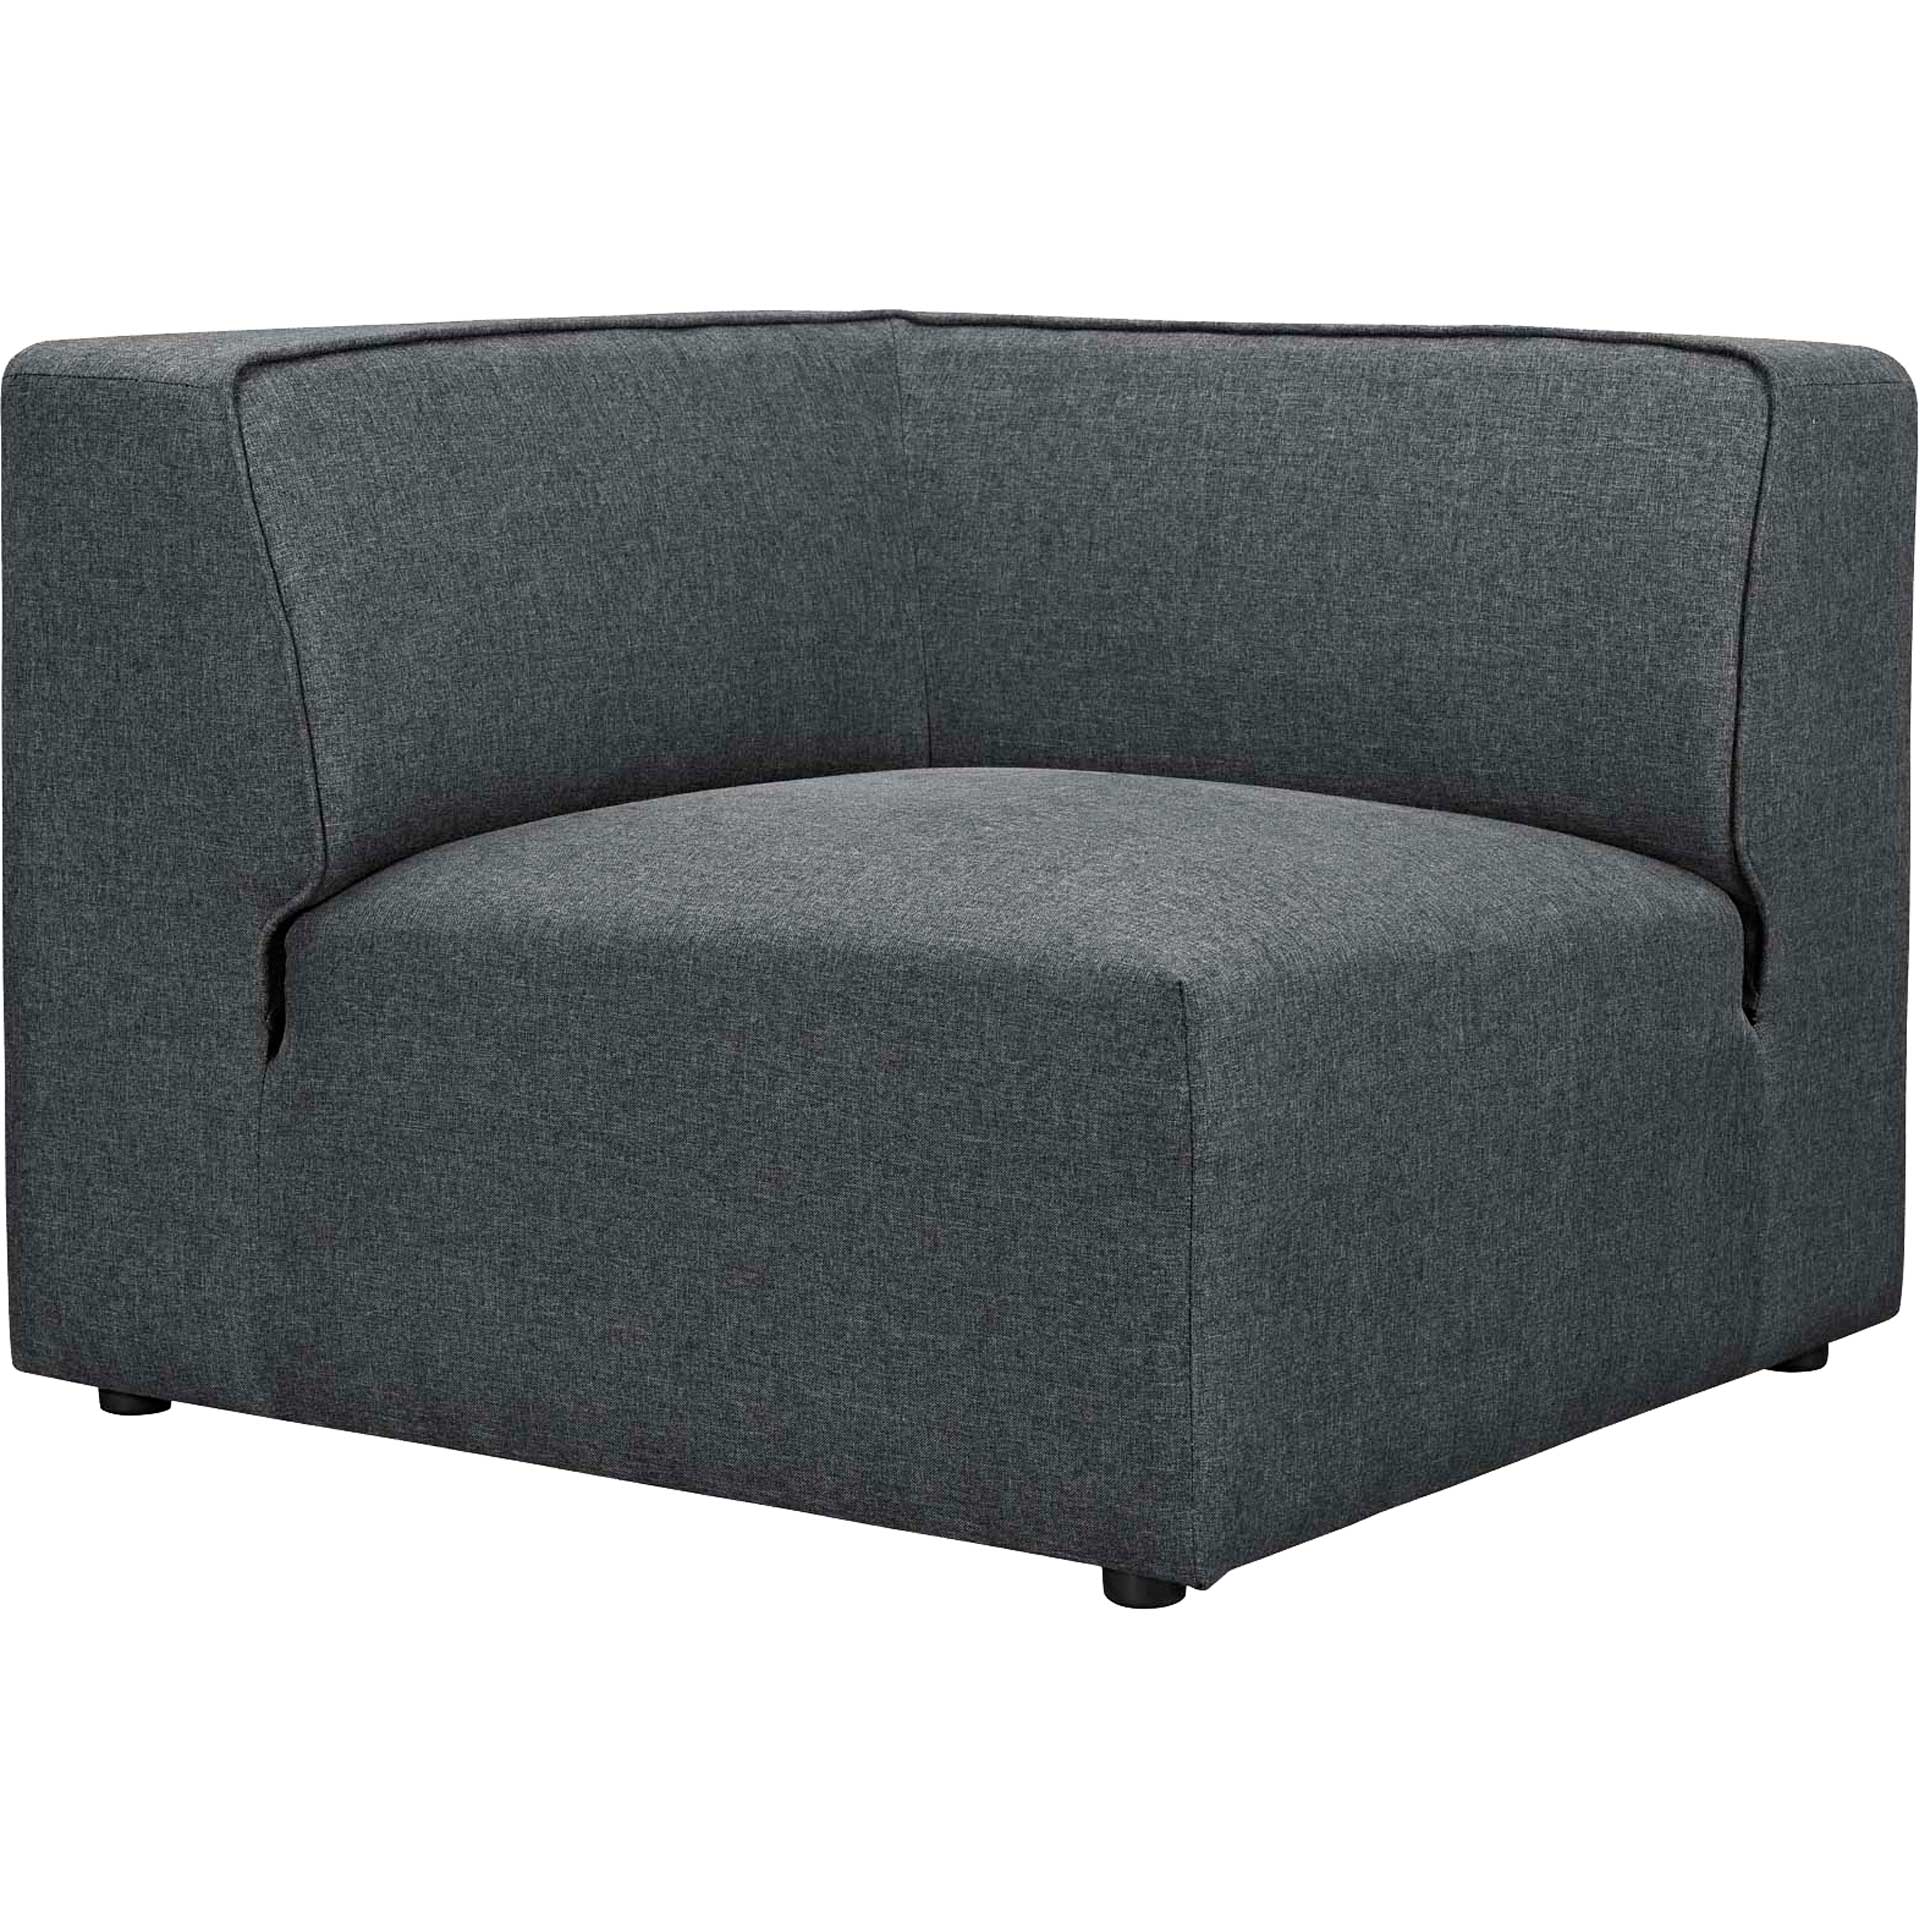 Maisie 7 Piece L-Shaped Sectional Sofa Gray